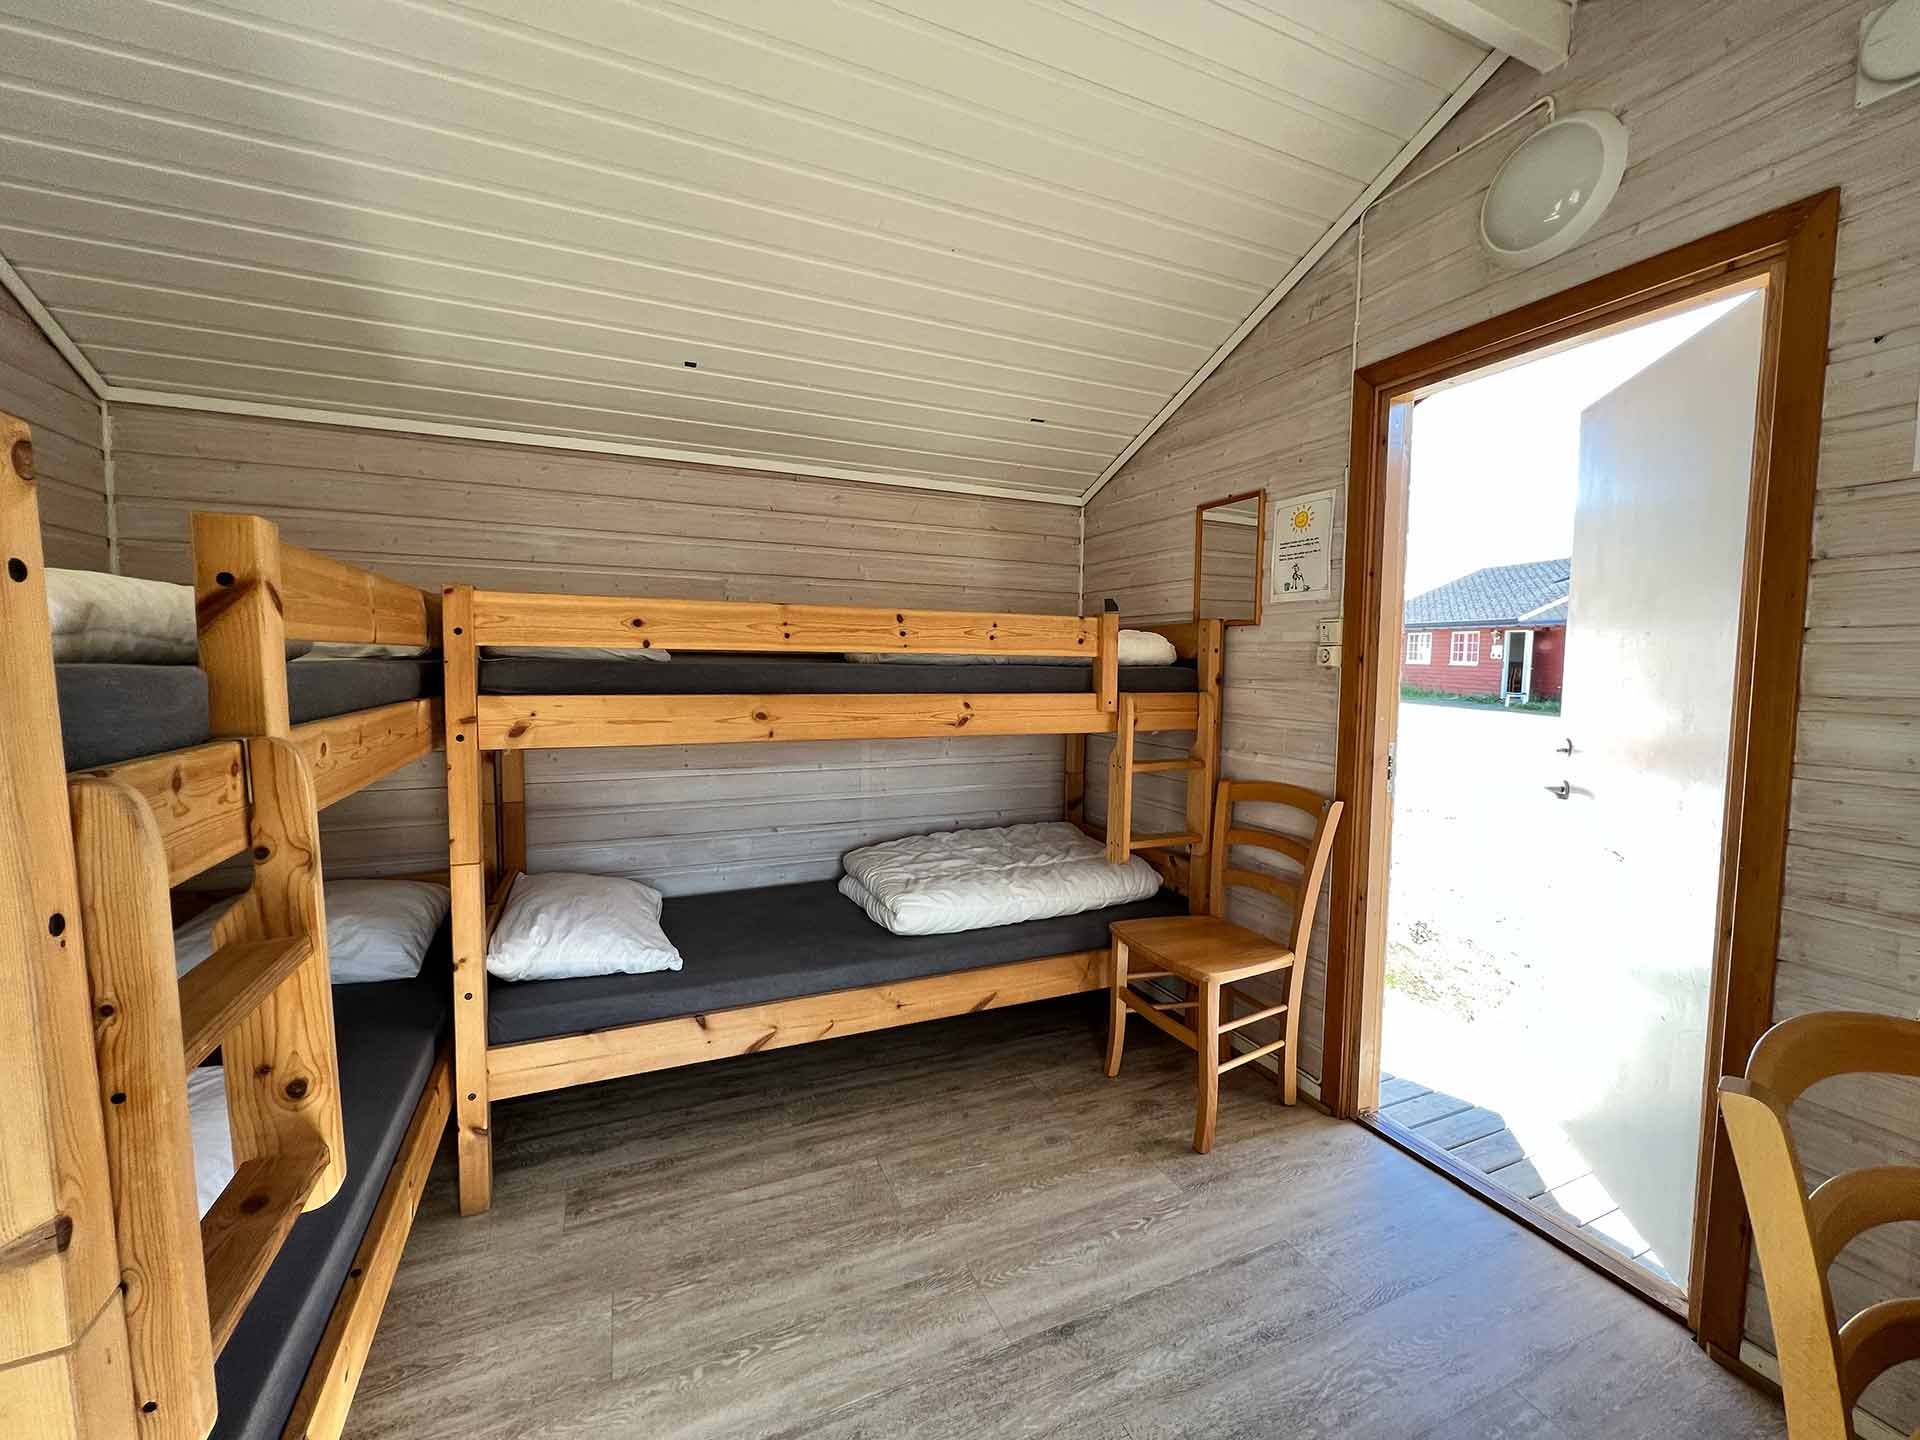 View of the room and the bunk beds